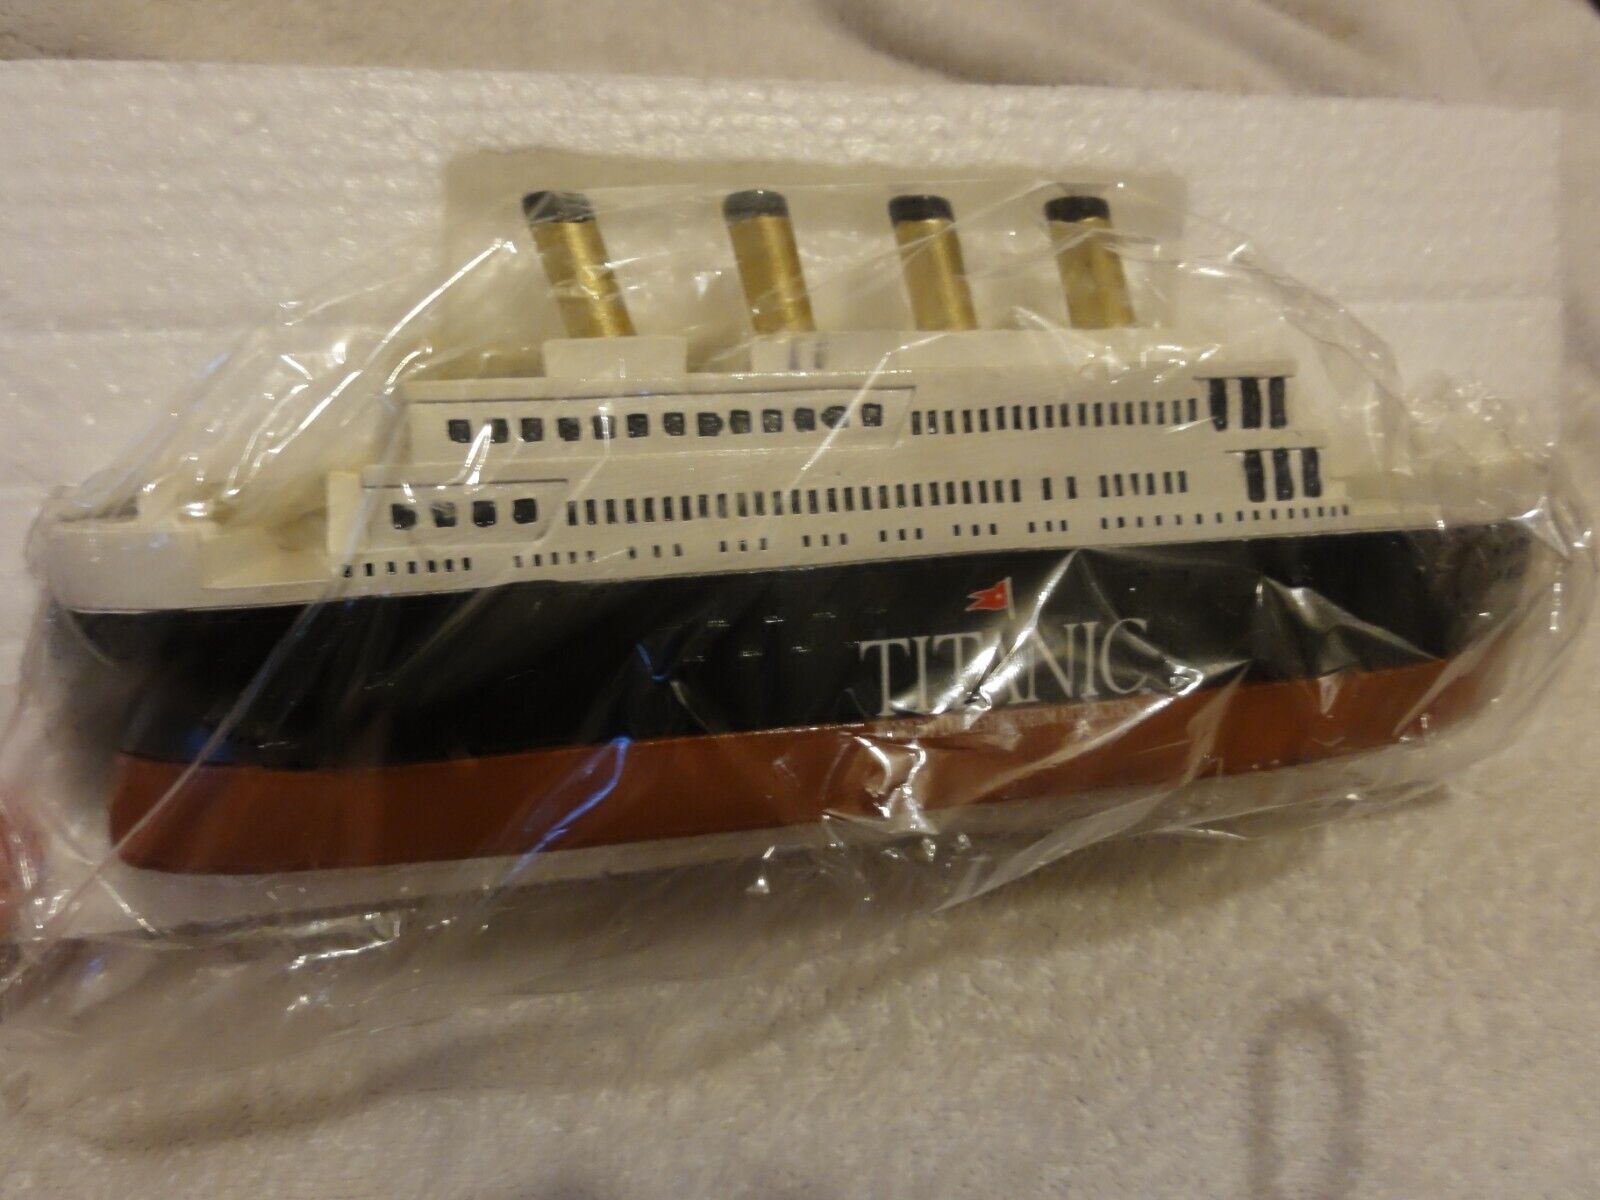 NEW Awesome Titanic Ship poly-Resin Model BANK 9 Inches long